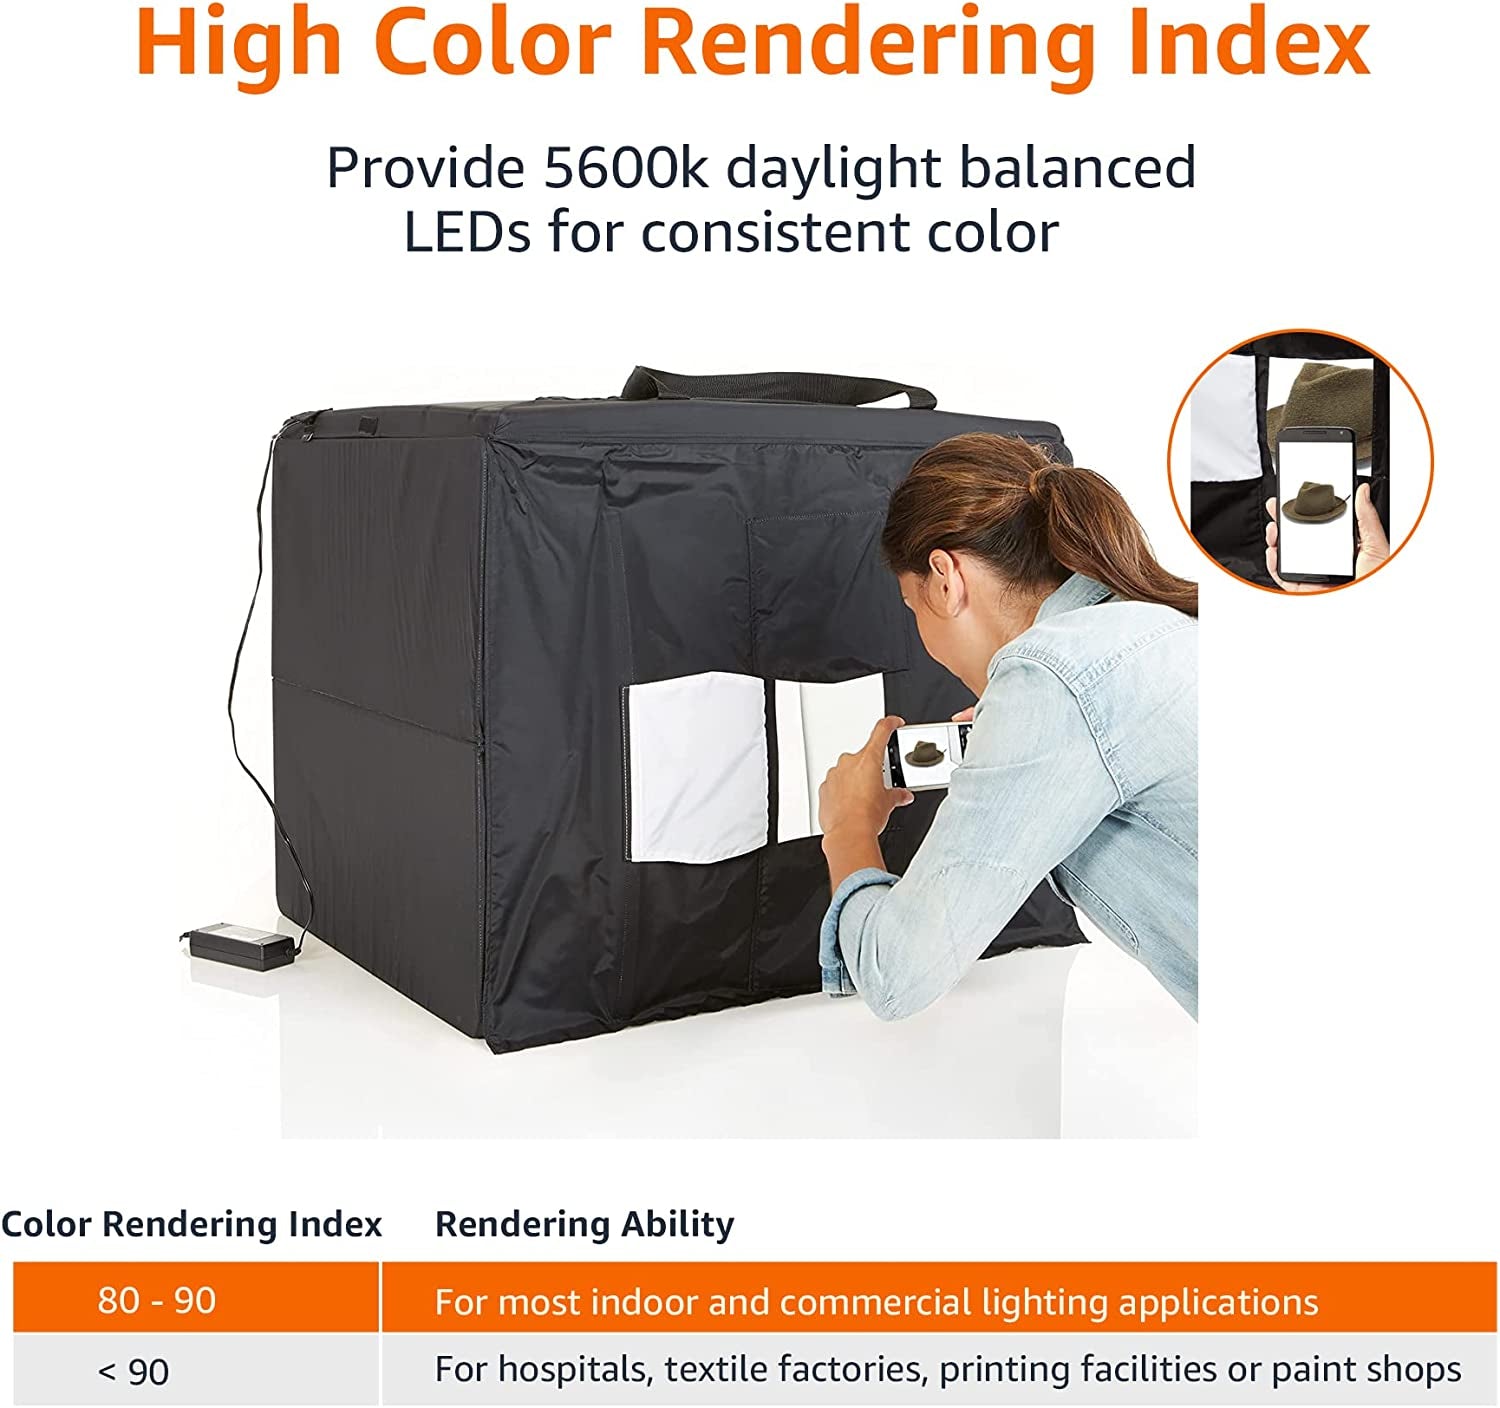 Portable Foldable Photo Studio Box with LED Light - 25 X 30 X 25 Inches